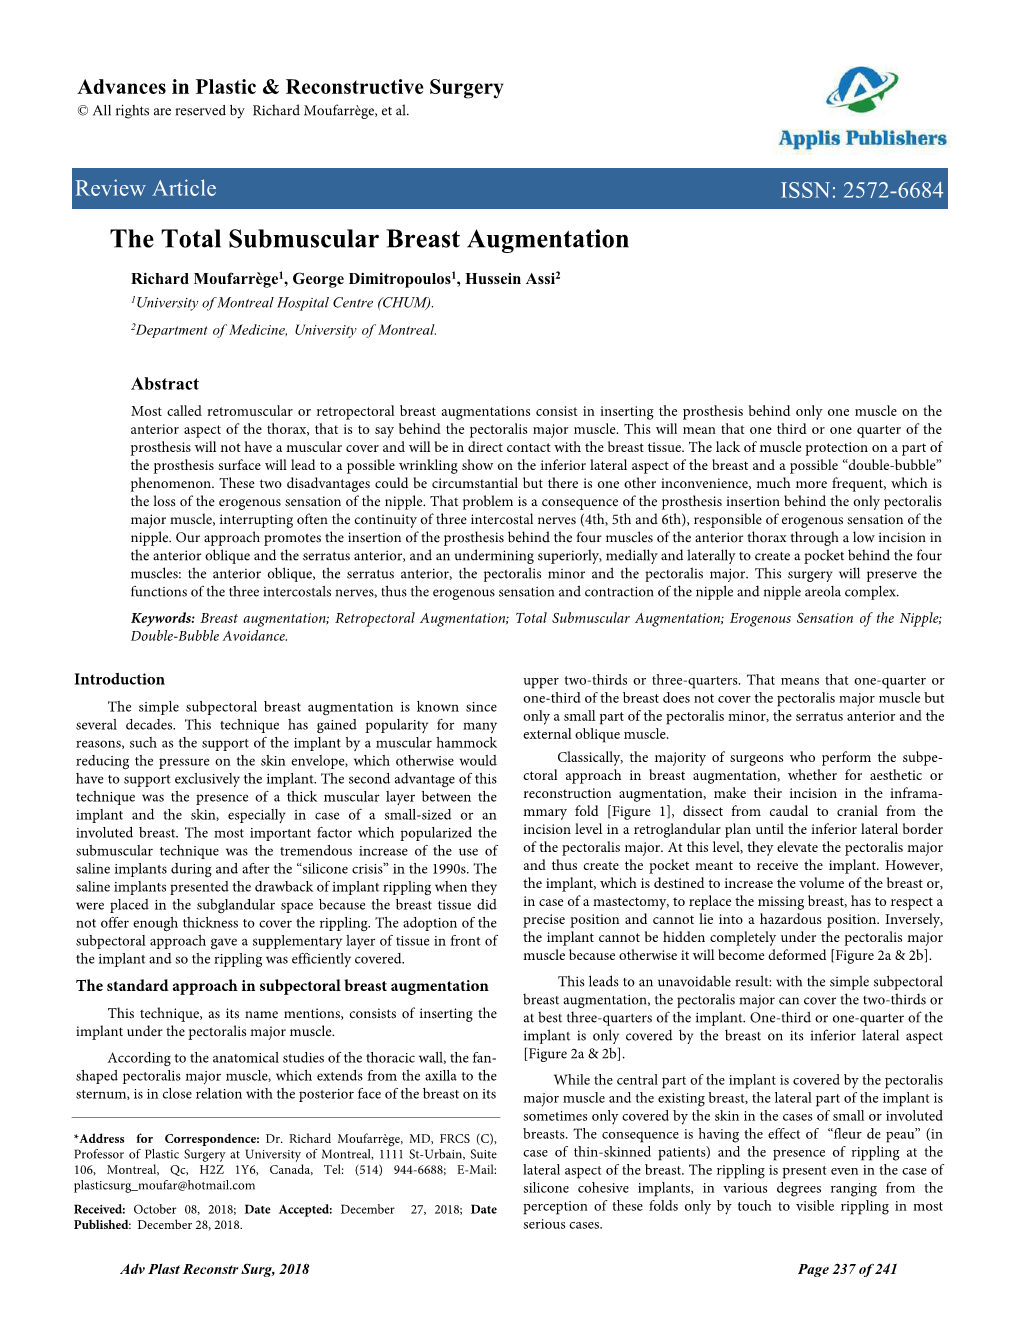 The Total Submuscular Breast Augmentation